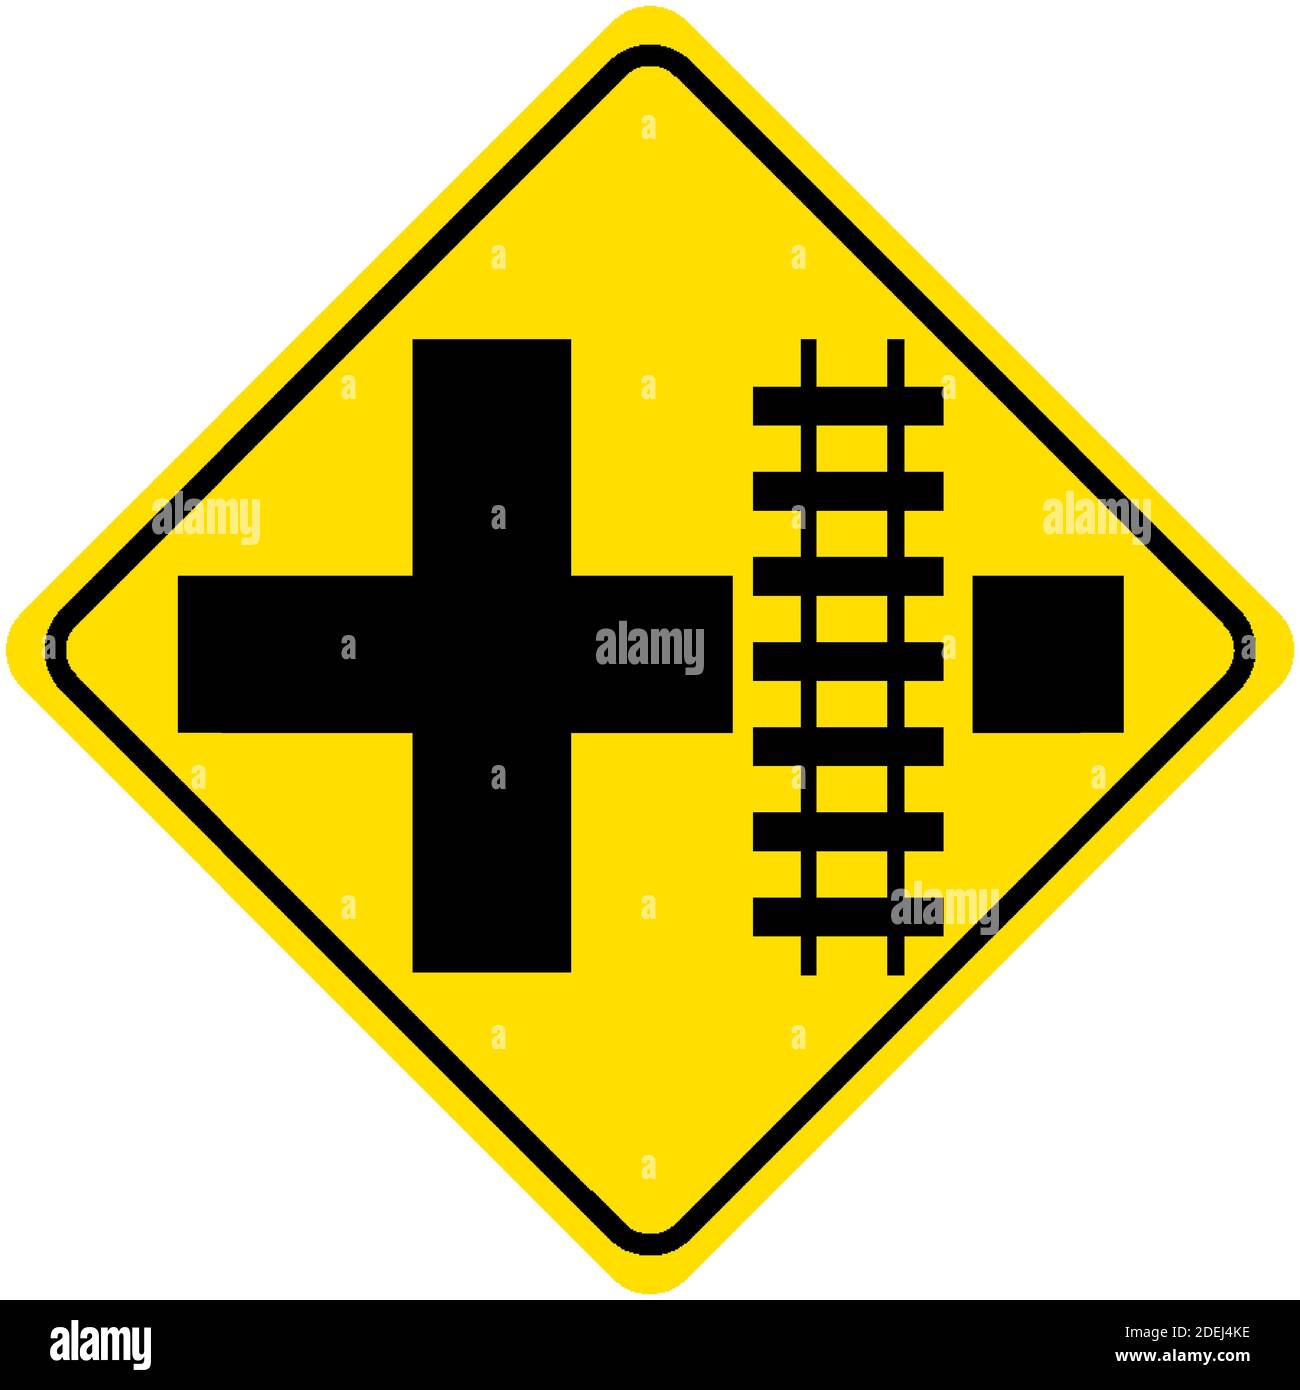 Highway rail crossing on side road to right yellow sign on white background illustration Stock Vector